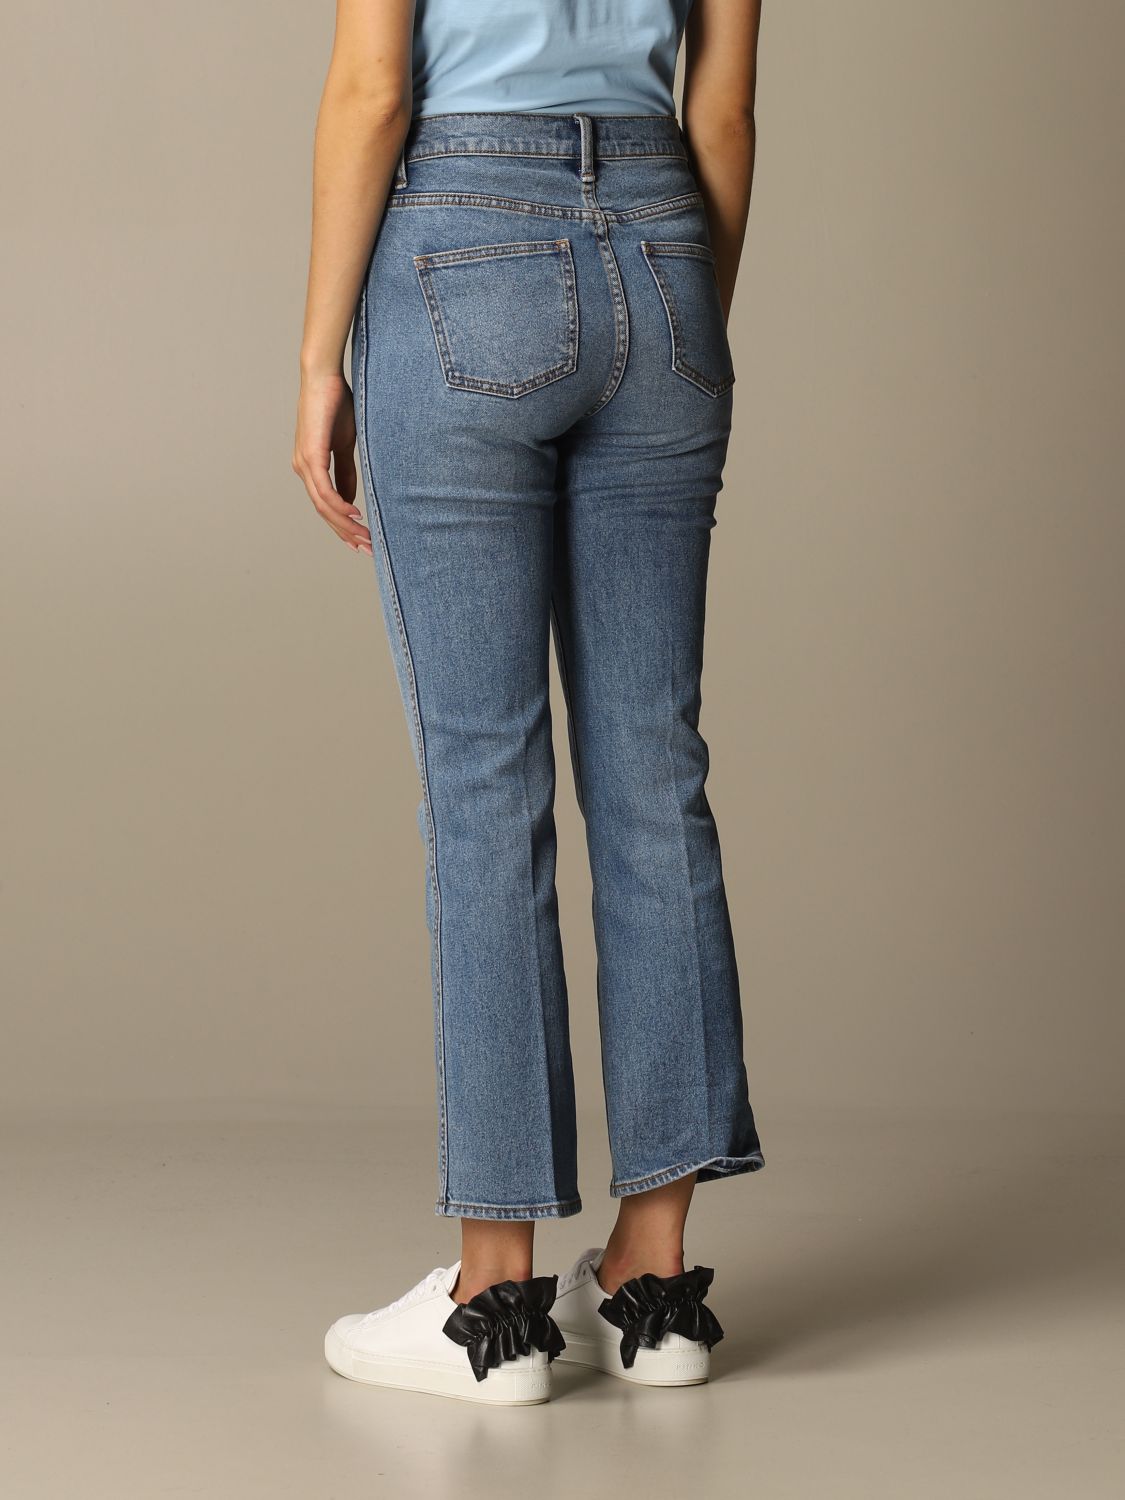 TORY BURCH: jeans in used denim - Blue | Tory Burch jeans 60118 online on  